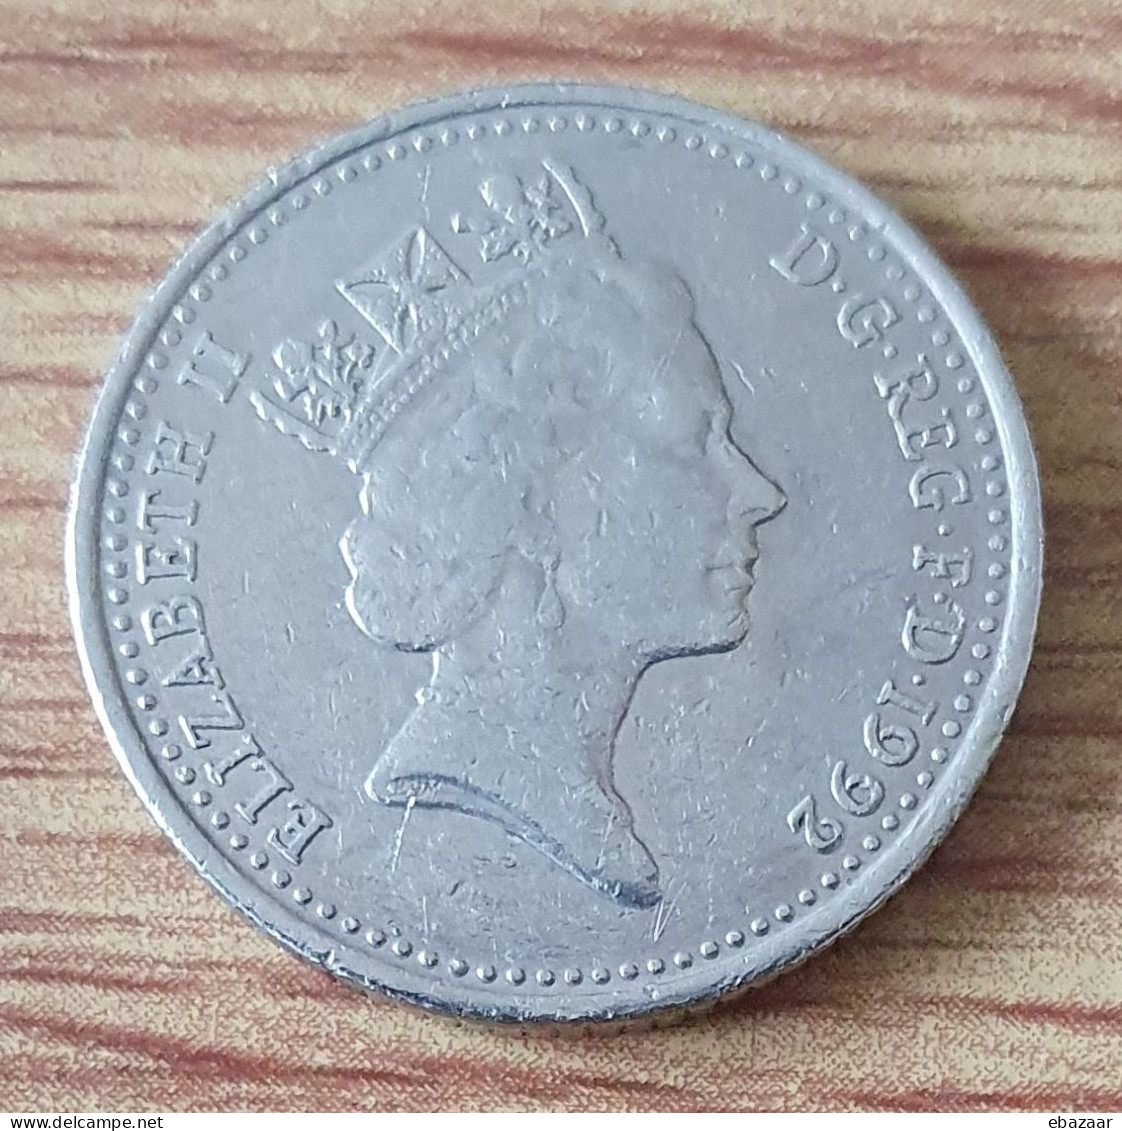 Great Britain 1992 United Kingdom Of England H.M. Queen Elizabeth II - Ten 10 Pence Coin UK - 10 Pence & 10 New Pence